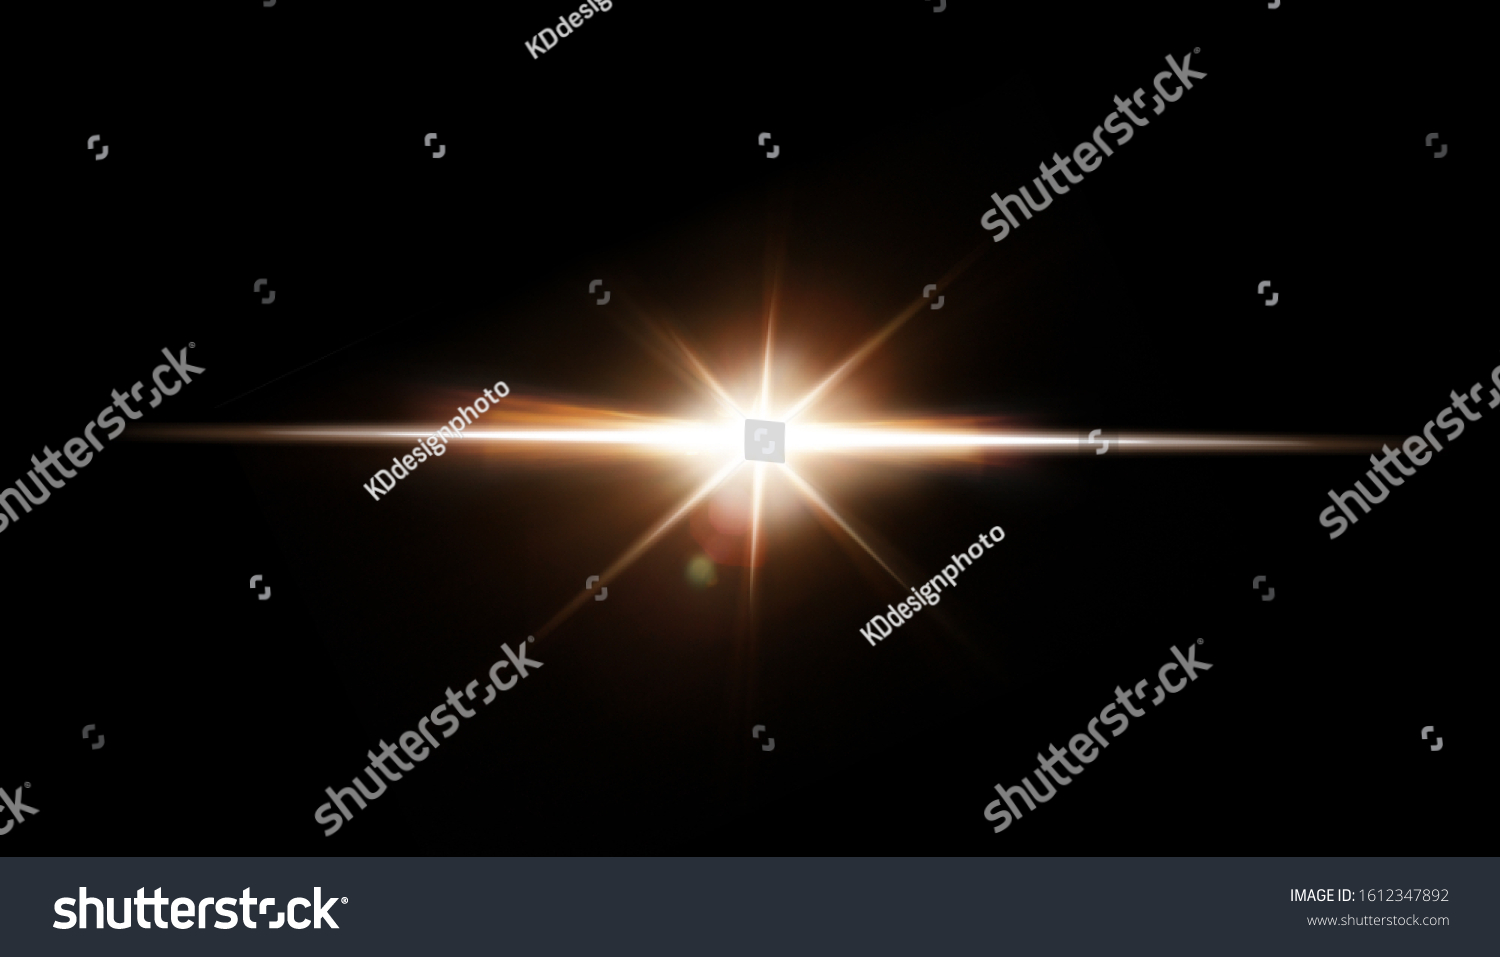 Lens Flare. Light over black background. Easy to add overlay or screen filter over photos. Abstract sun burst with digital lens flare background. Gleams rounded and hexagonal shapes. #1612347892